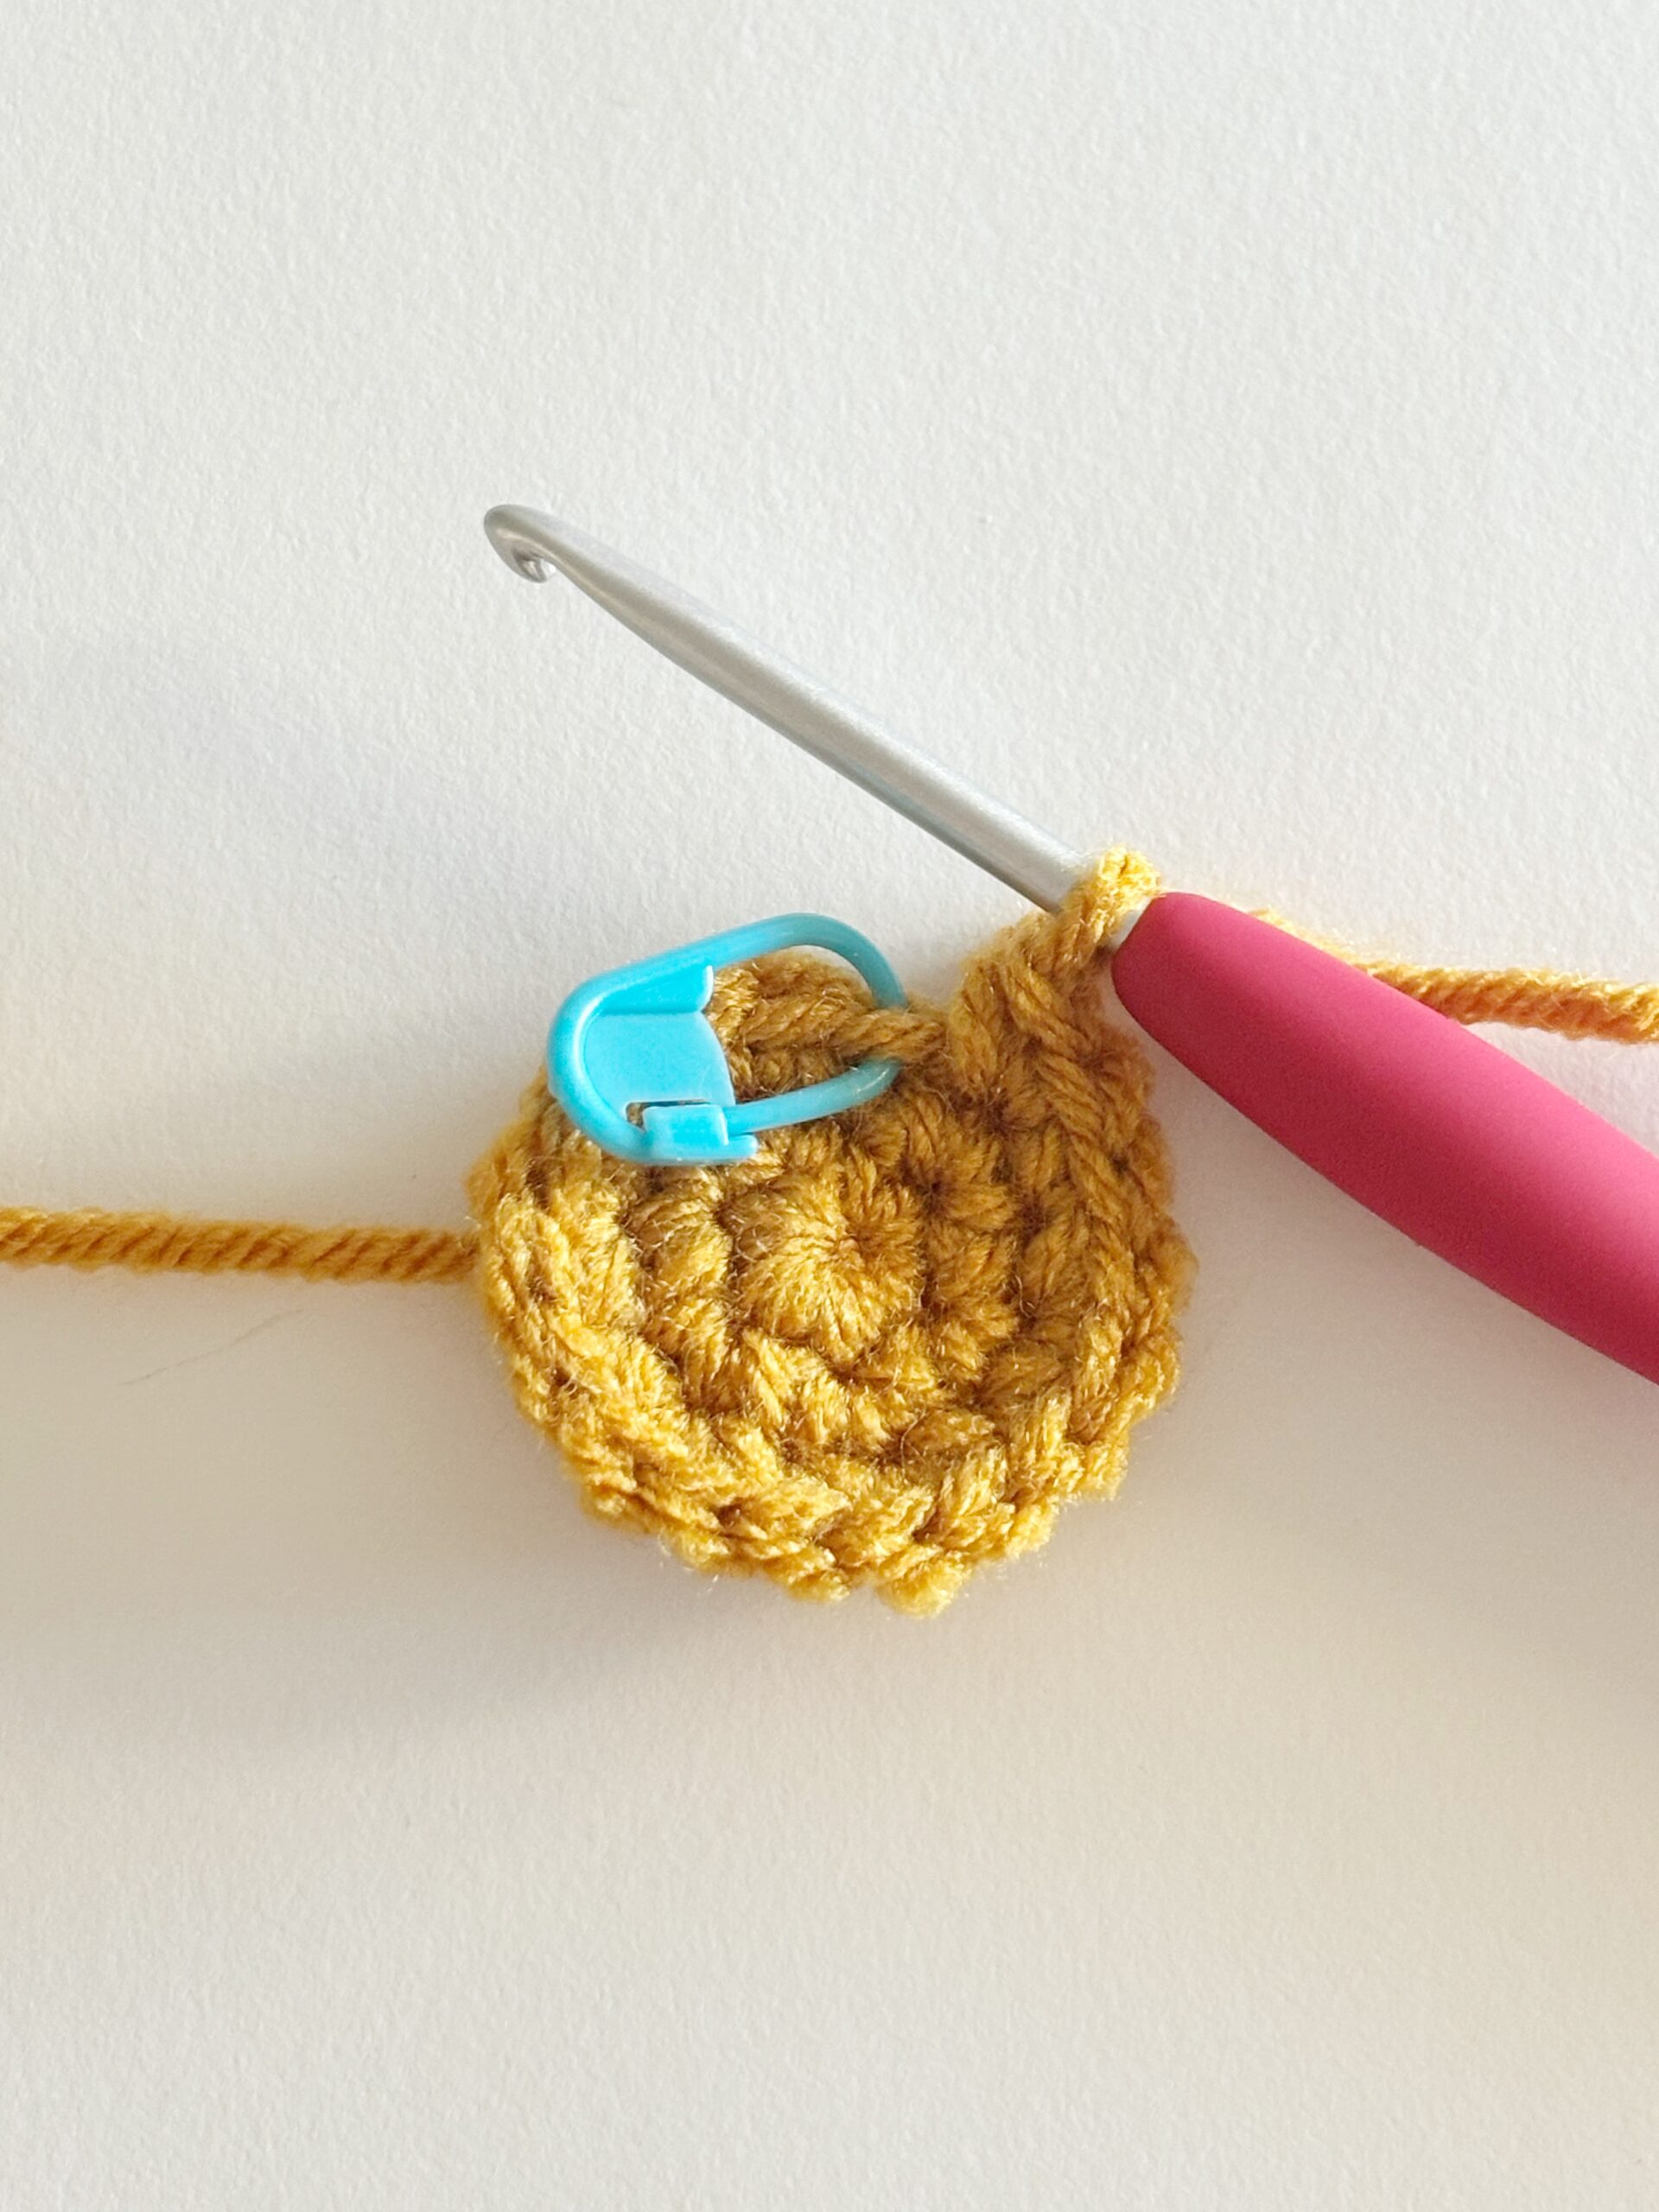 How to read a crochet pattern Step 3